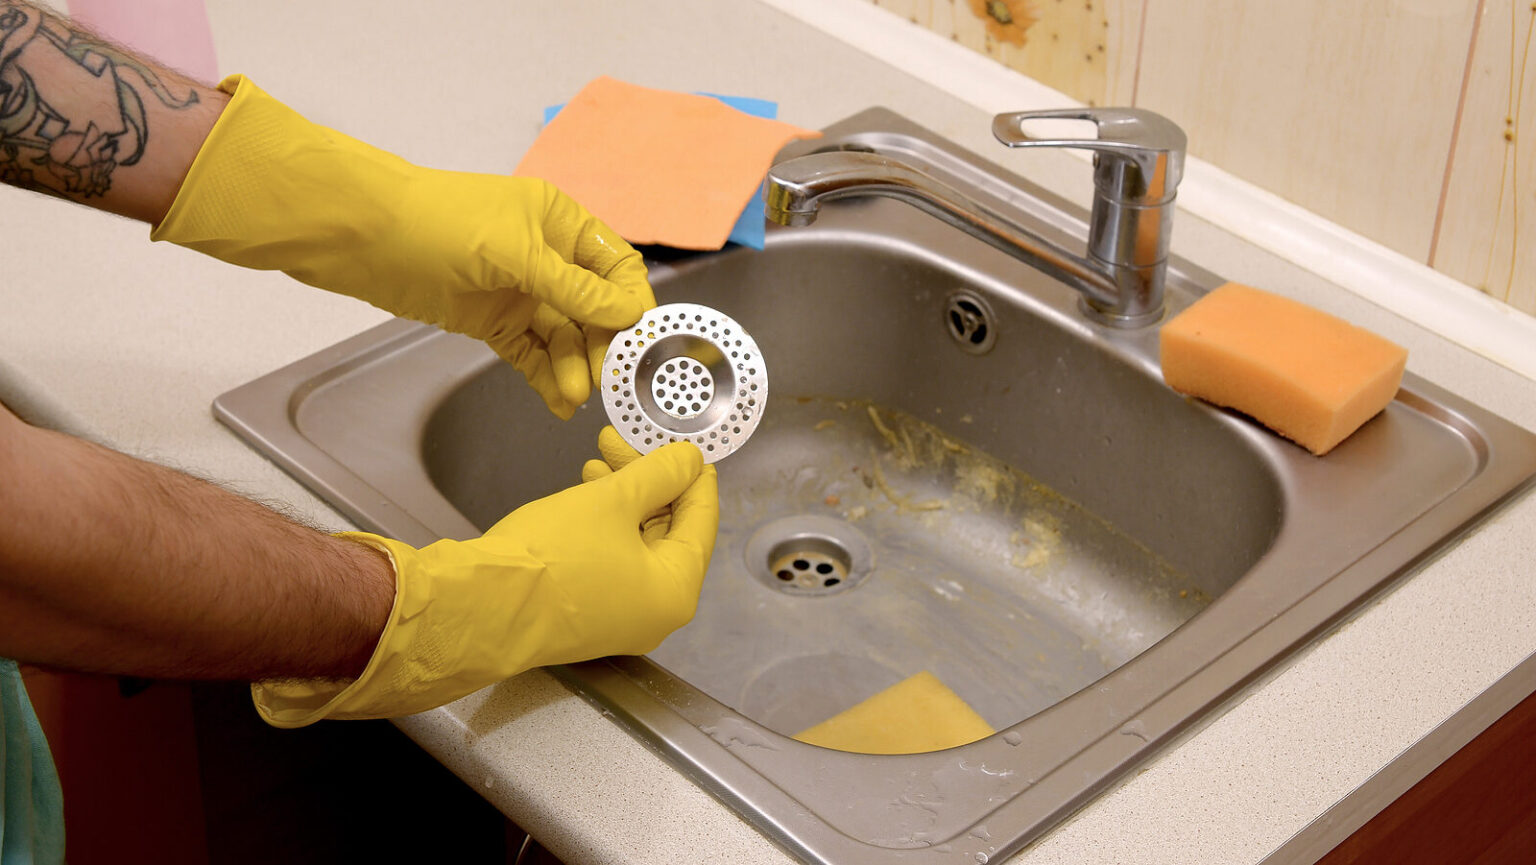 Cleaner In Rubber Gloves Shows Clean Plughole Protector Of A Kitchen Sink Edited 1536x865 